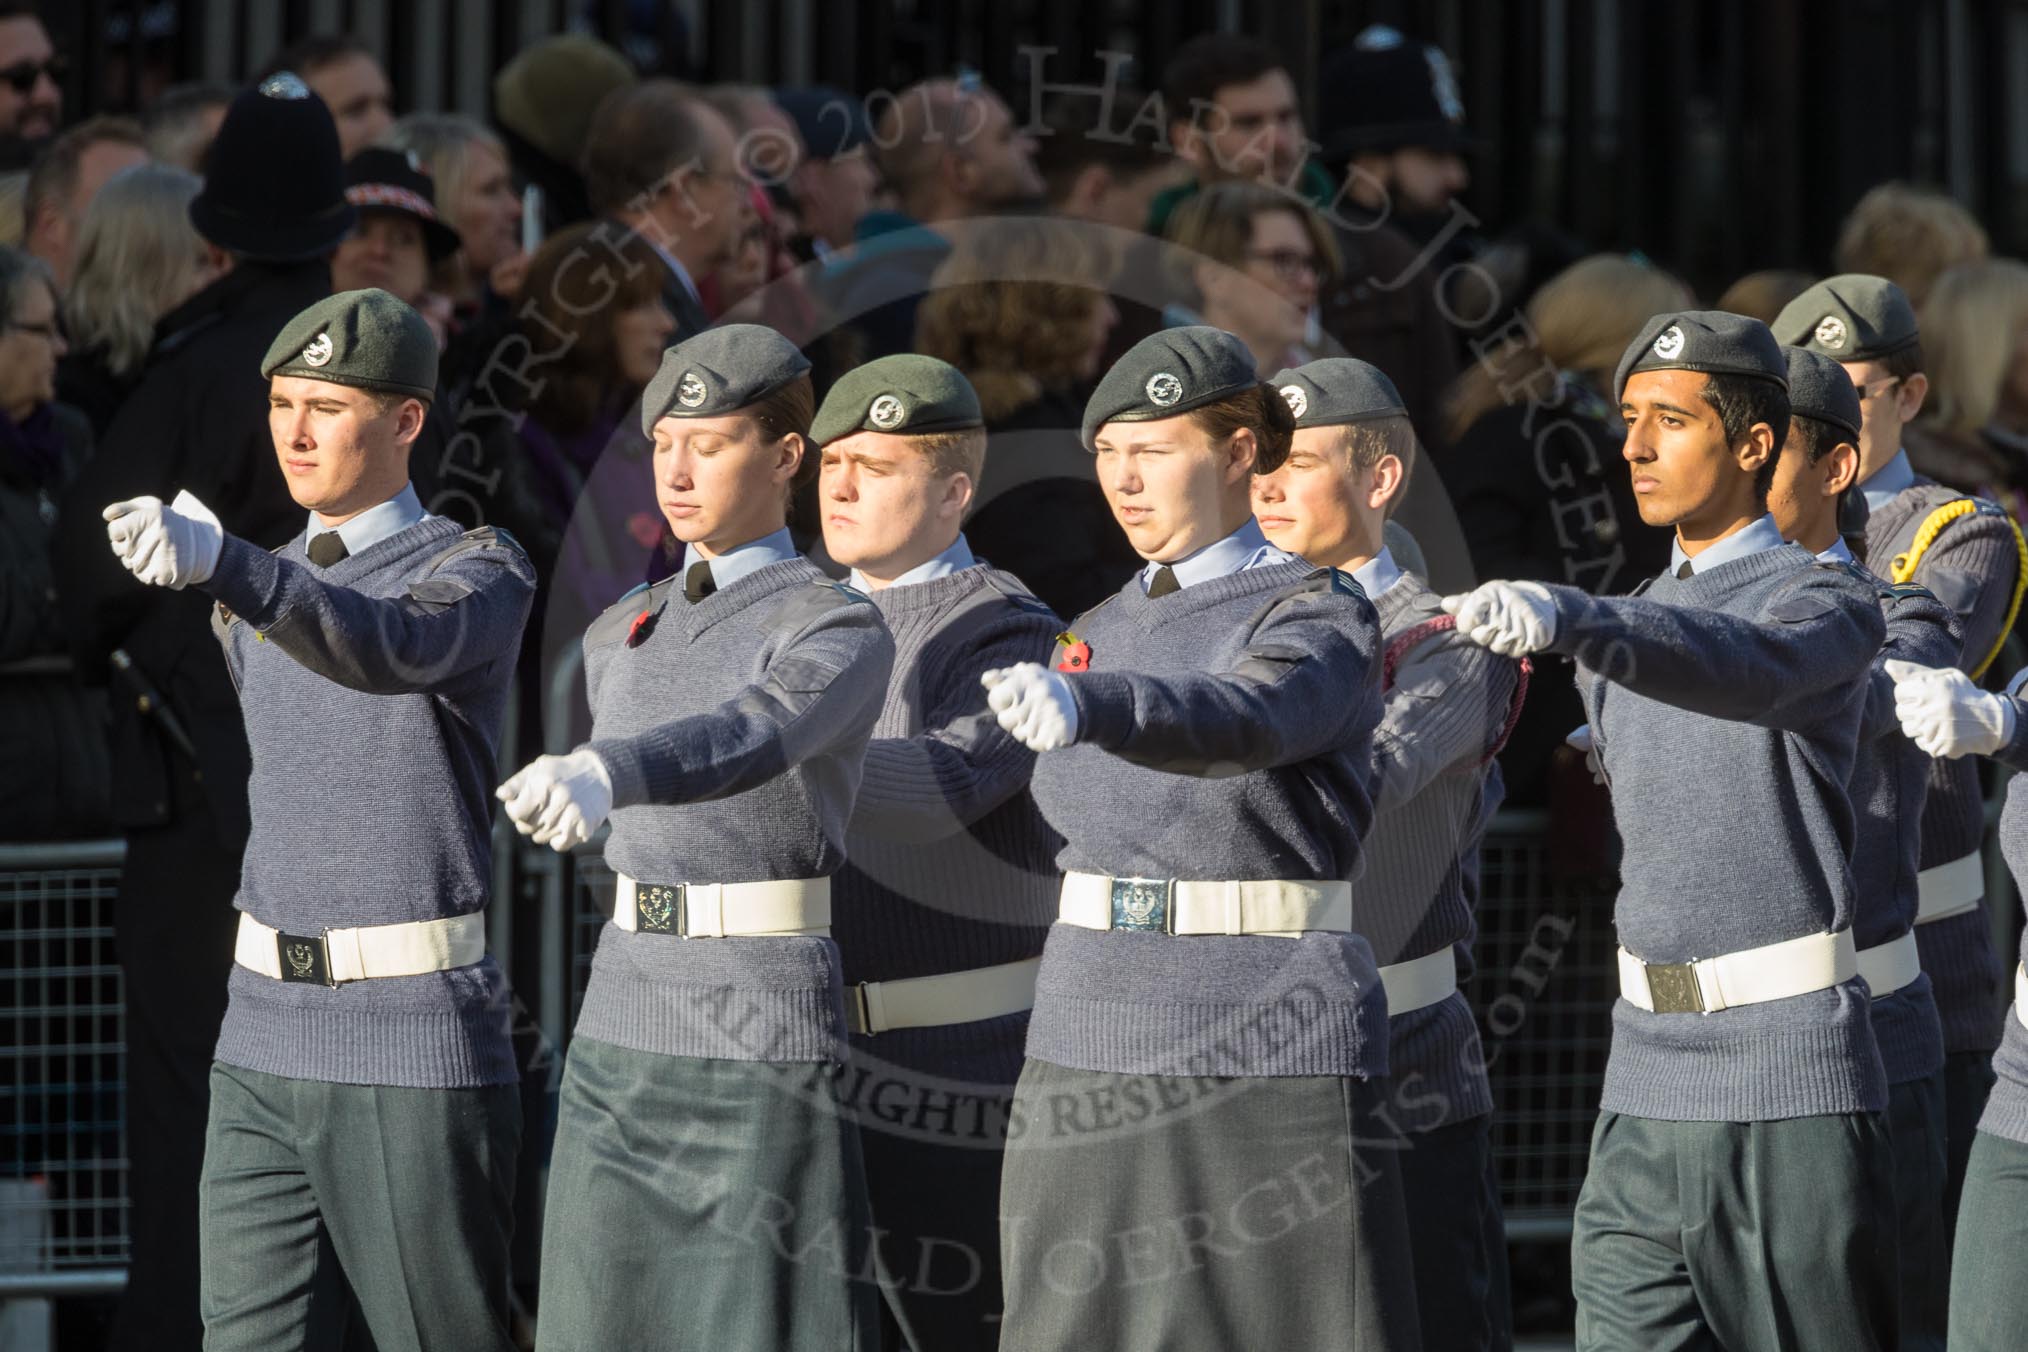 March Past, Remembrance Sunday at the Cenotaph 2016: M33 Scout Association.
Cenotaph, Whitehall, London SW1,
London,
Greater London,
United Kingdom,
on 13 November 2016 at 13:18, image #2828